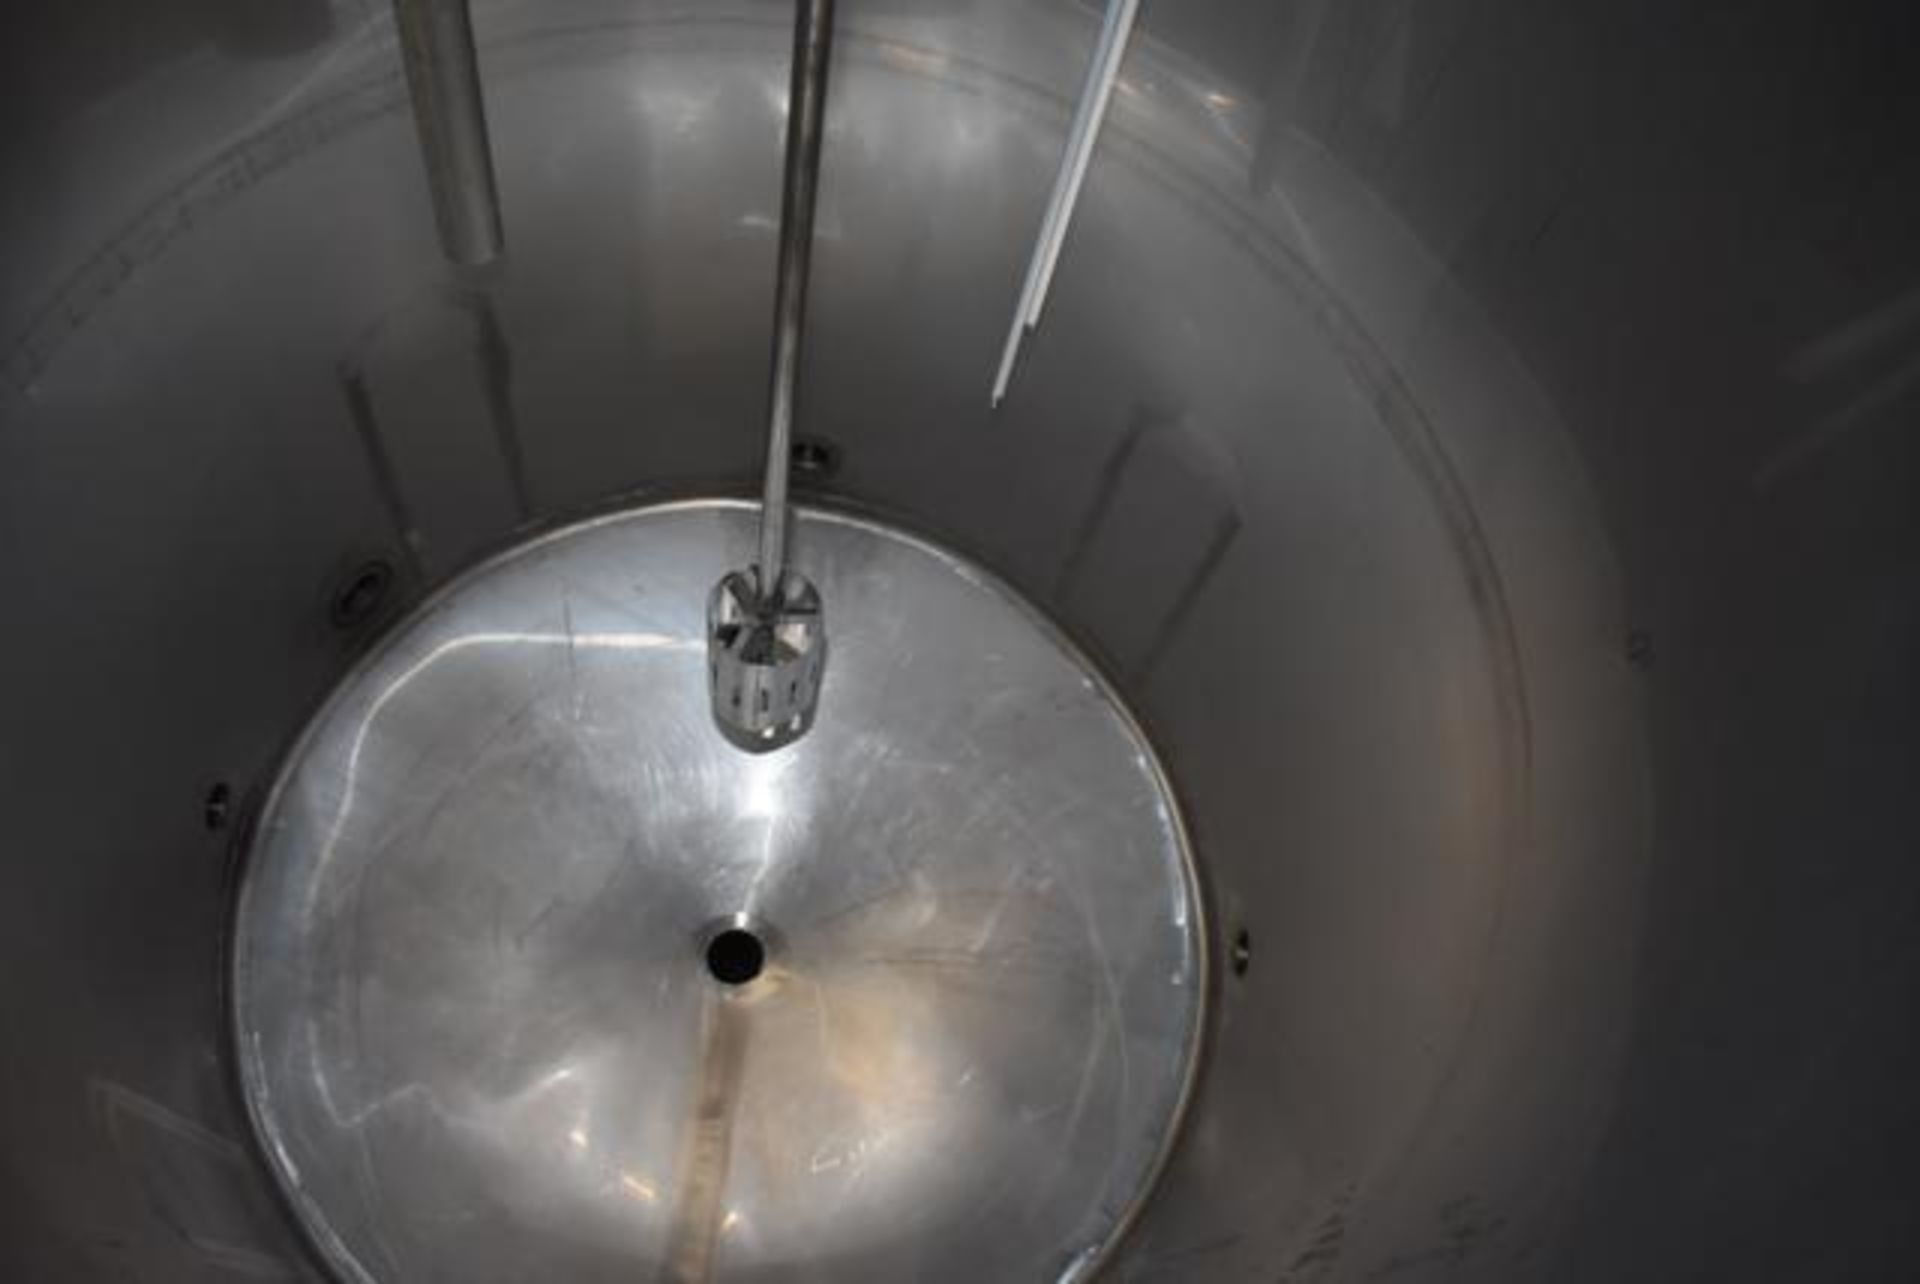 ,Stainless Steel Tank, 48 in Diameter x 60 in Depth, Rated 500 Gal. Capacity, Includes Mixer, SS Leg - Image 2 of 2